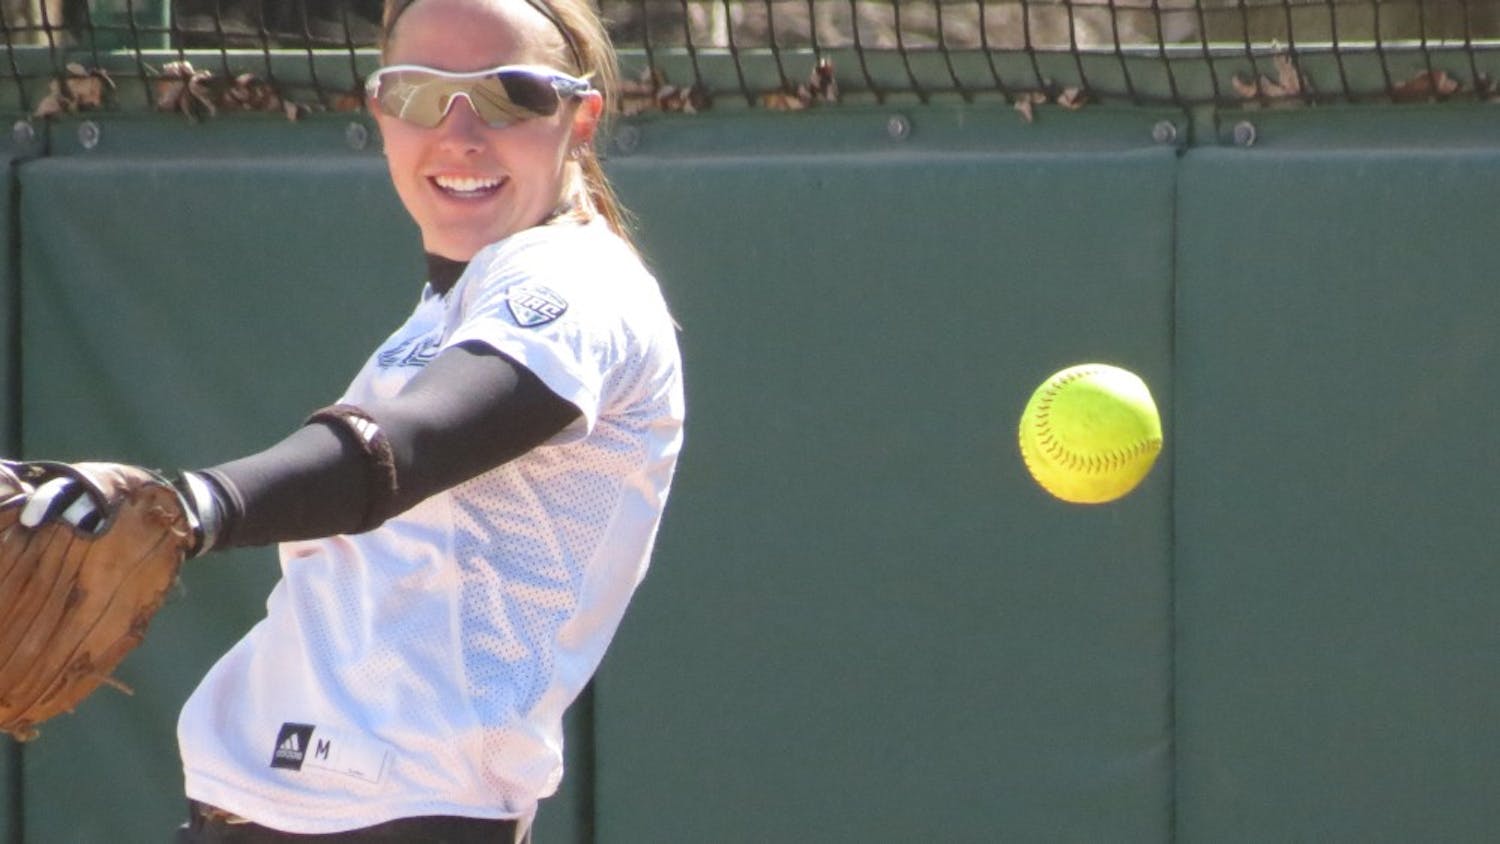 	The Eagles lost the first game 4-3 and the second 11-2 to the Golden Flashes on Friday afternoon.